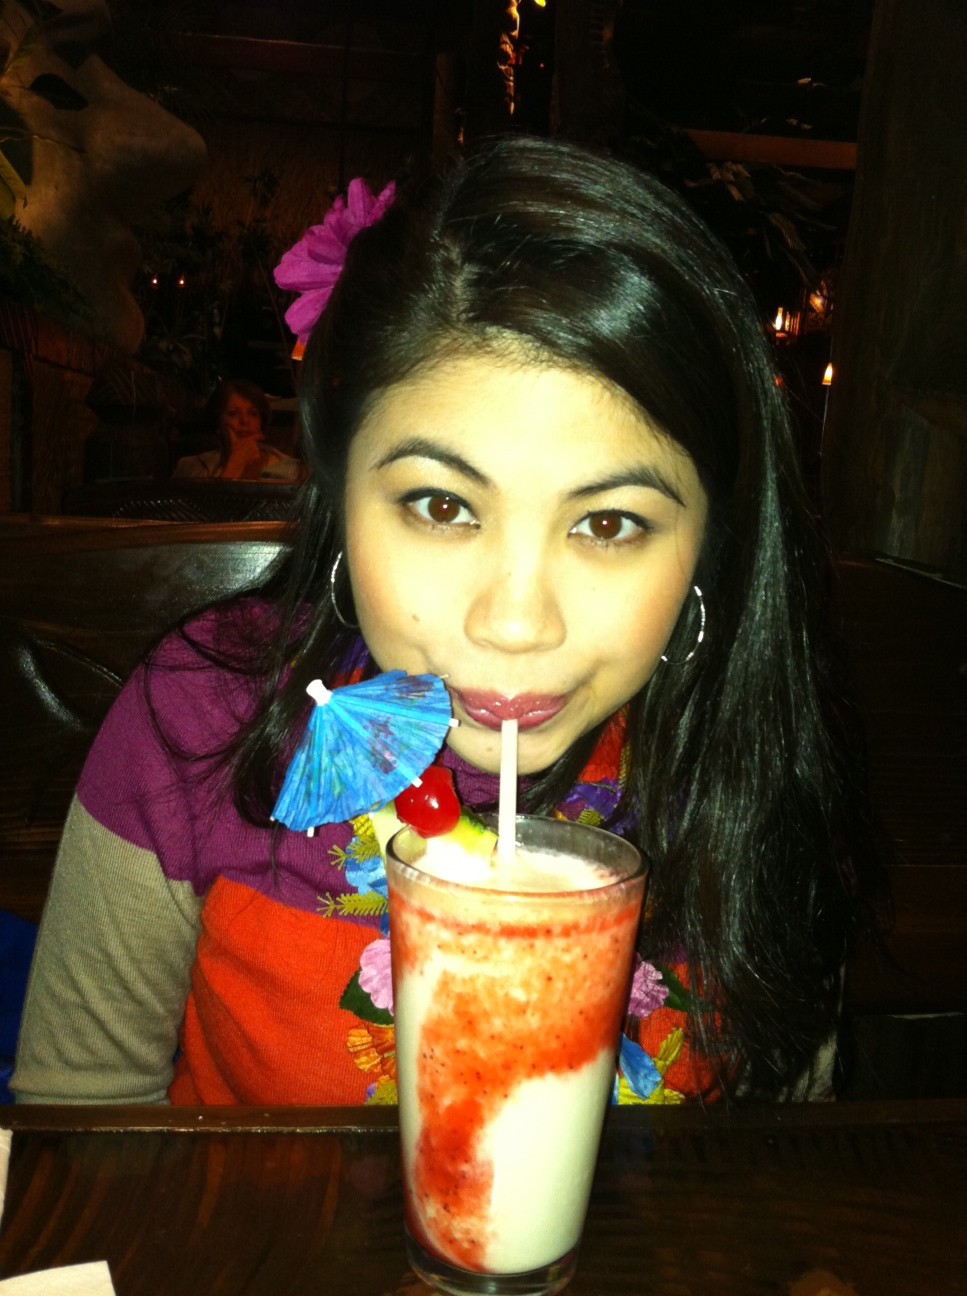 Woman with long dark is drinking a colorful drink that has a blue paper umbrella in it.